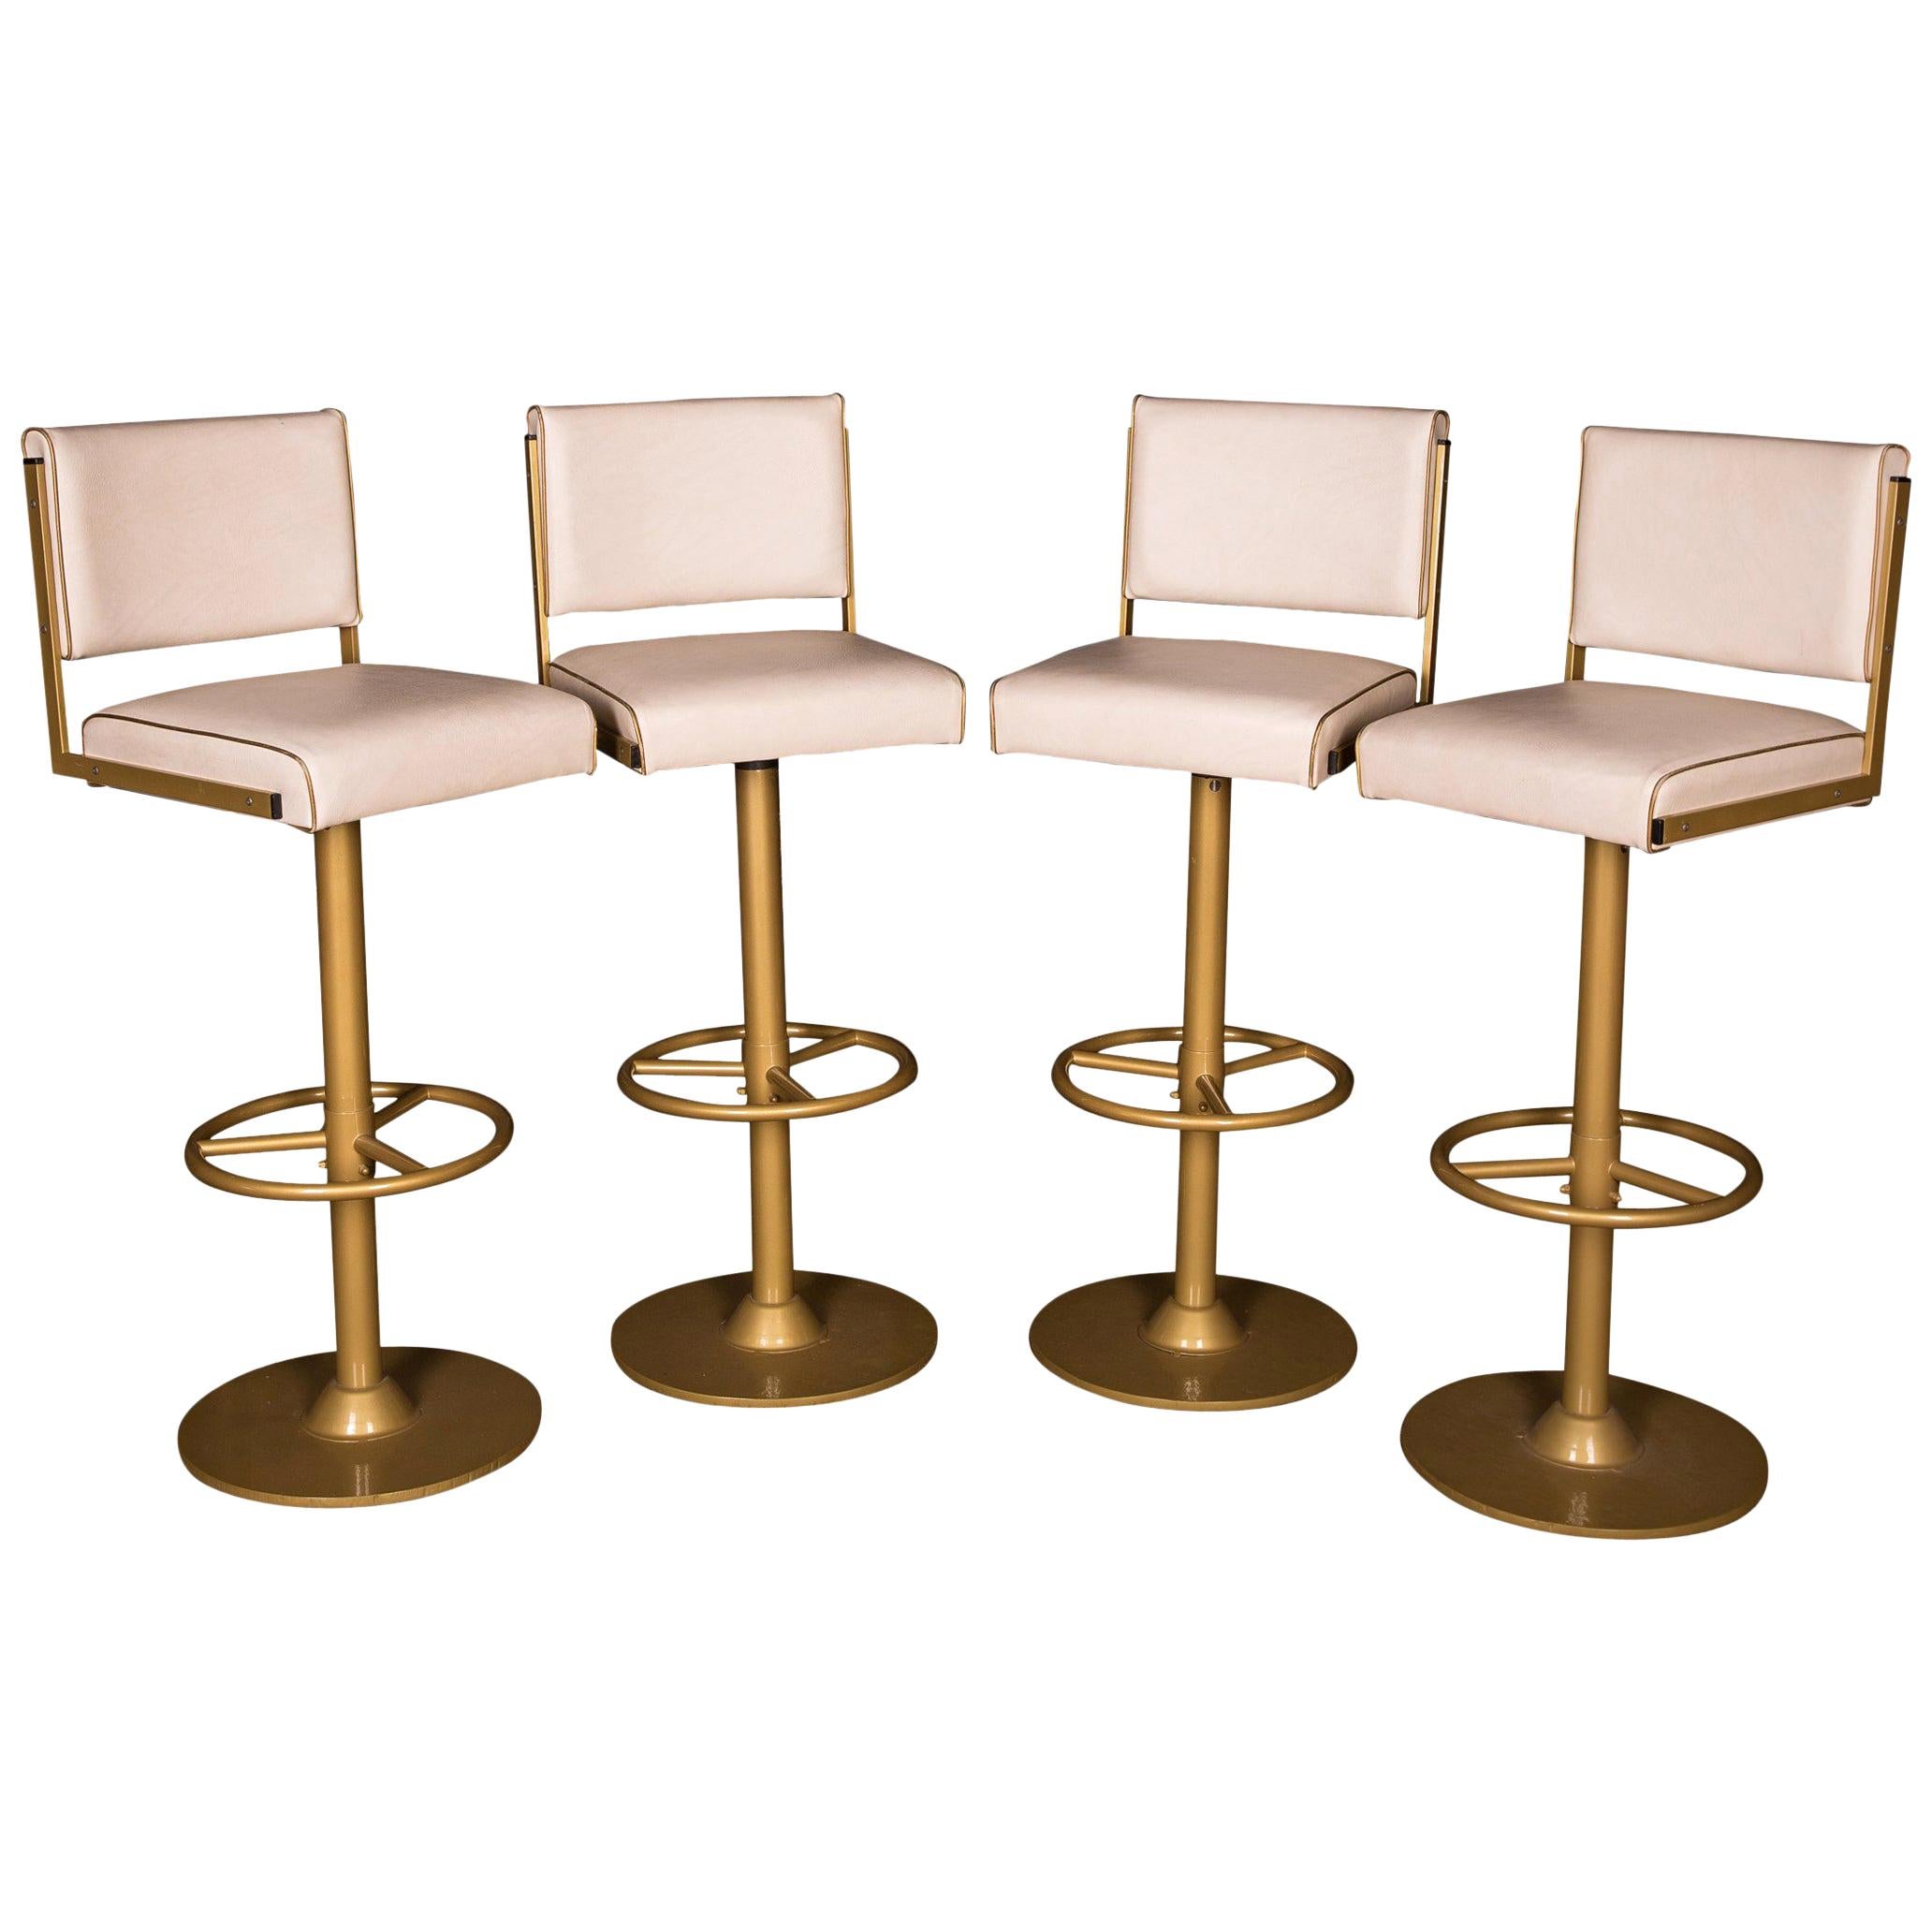 Four High Quality Bar Stools Made of Metal in Golden Color